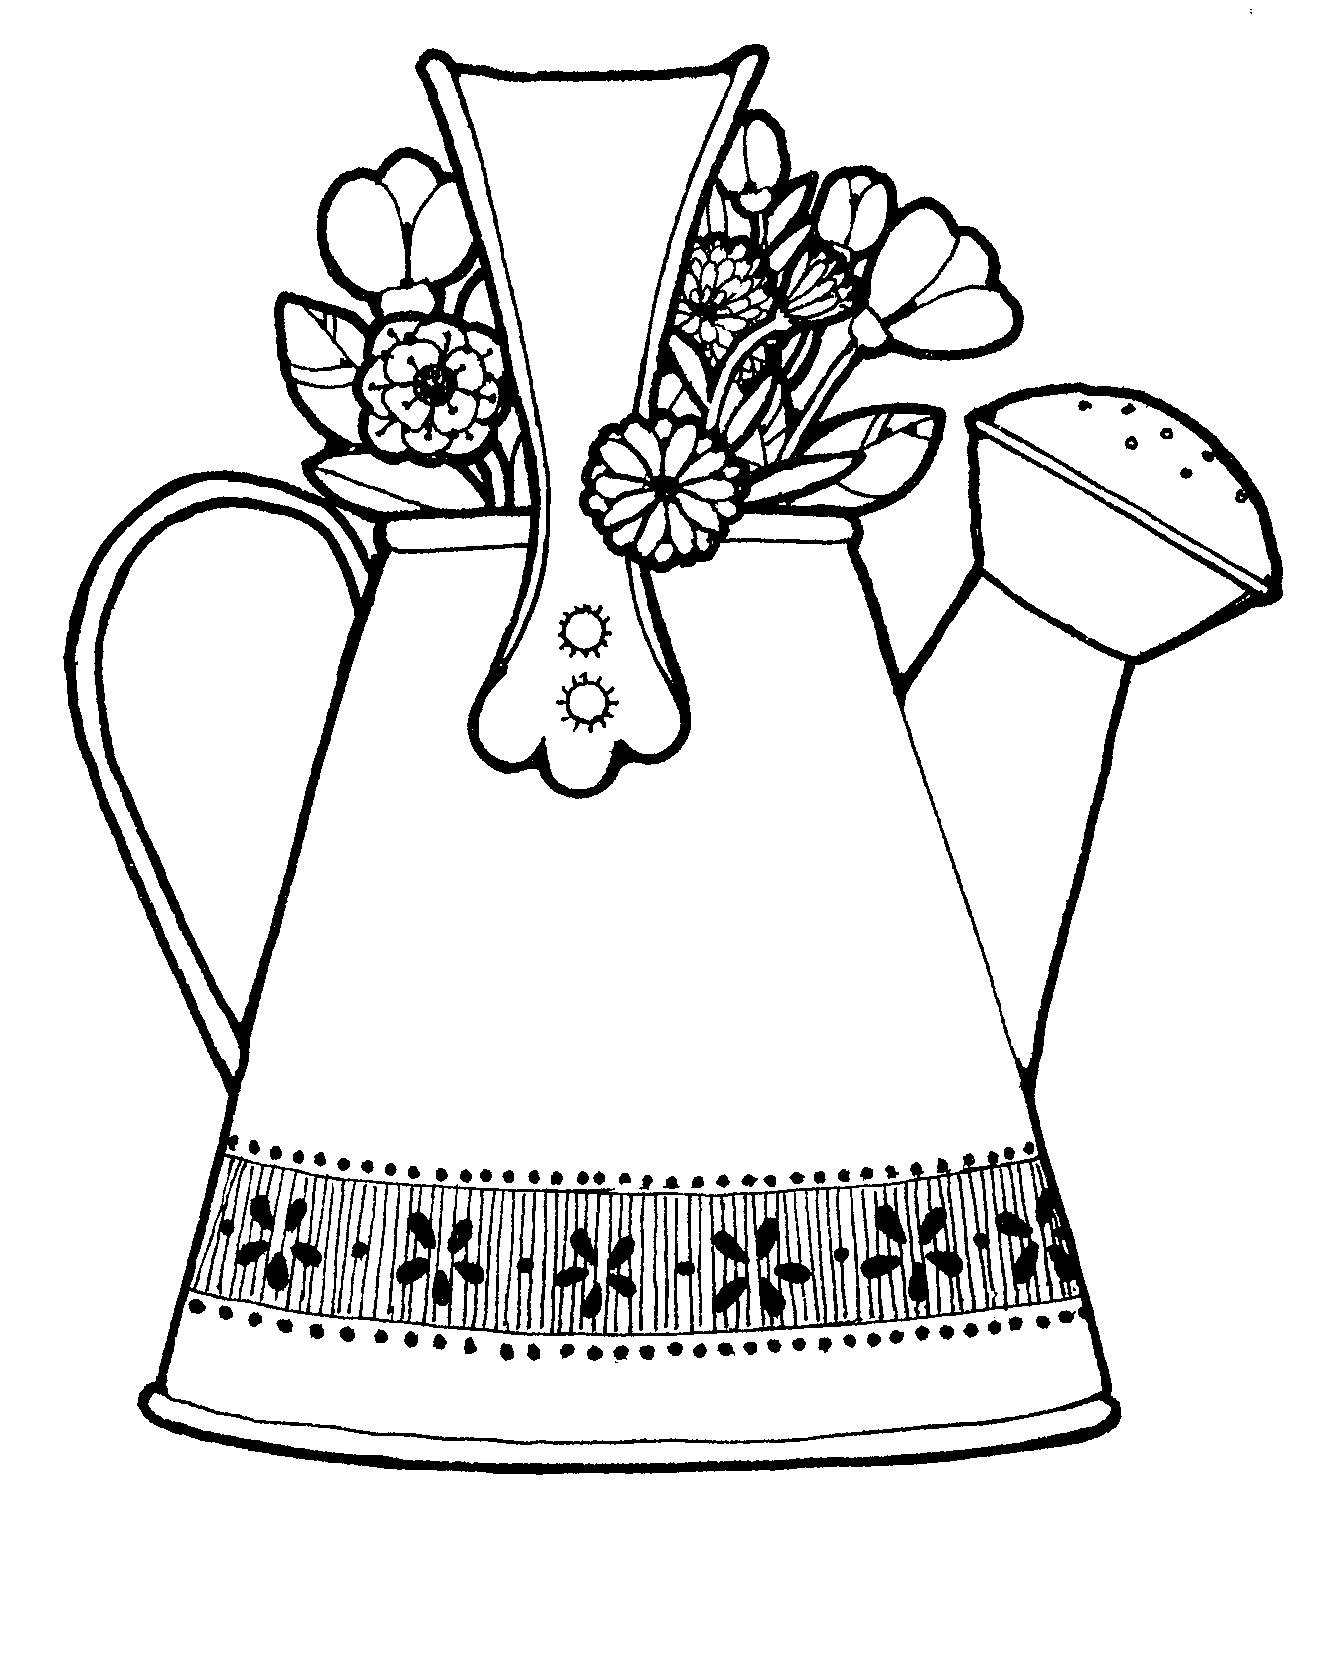 Spring Watering Can Coloring Pages - ClipArt Best